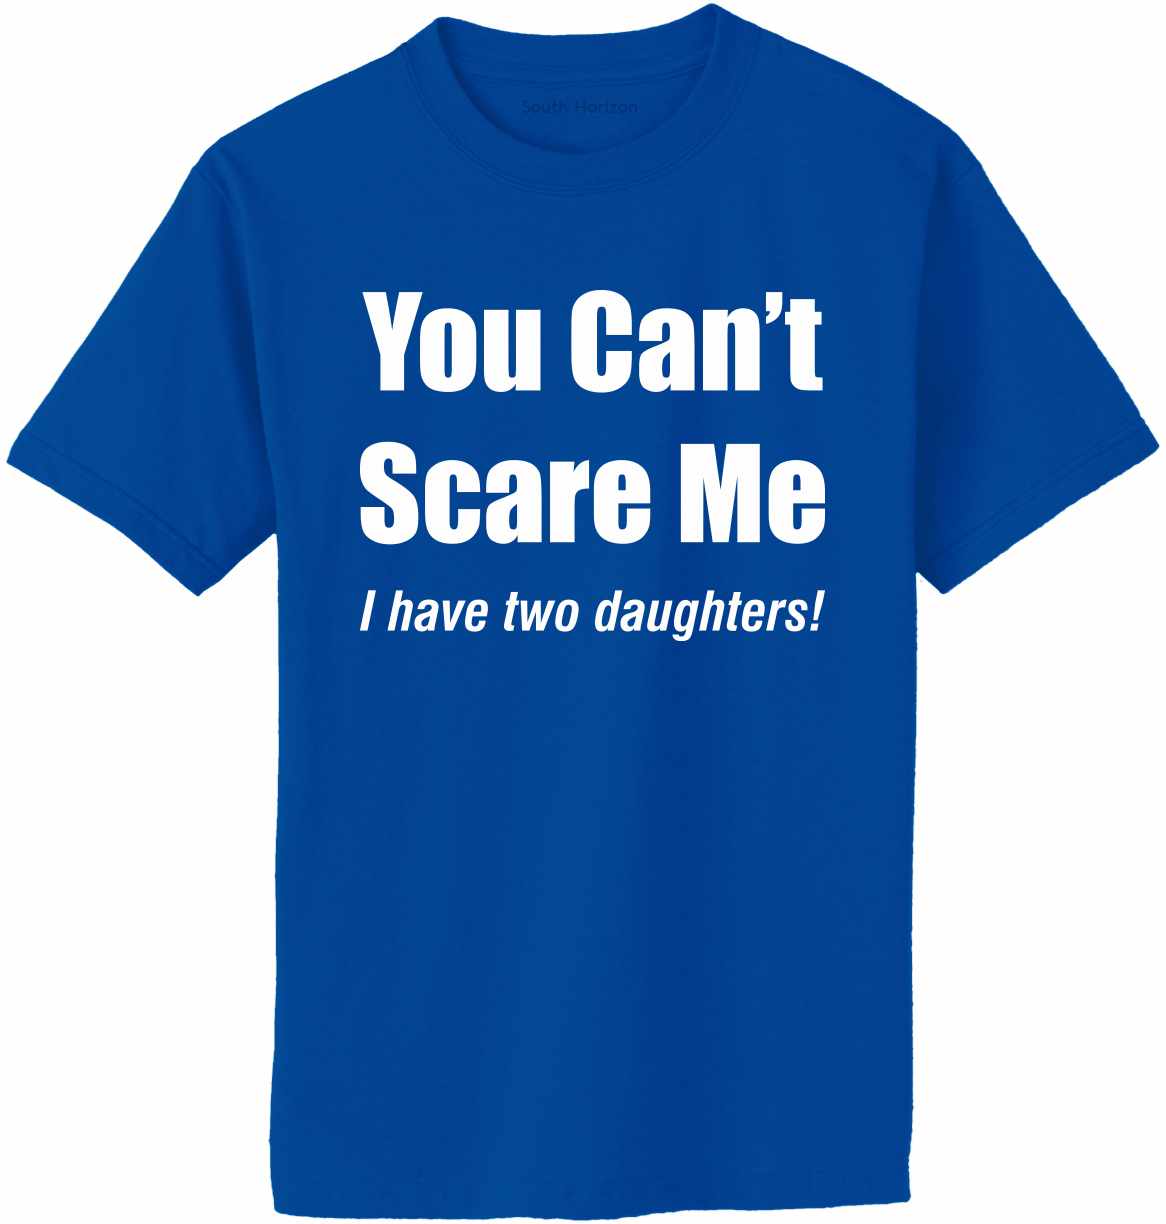 You Can't Scare Me, I have Two Daughters Adult T-Shirt